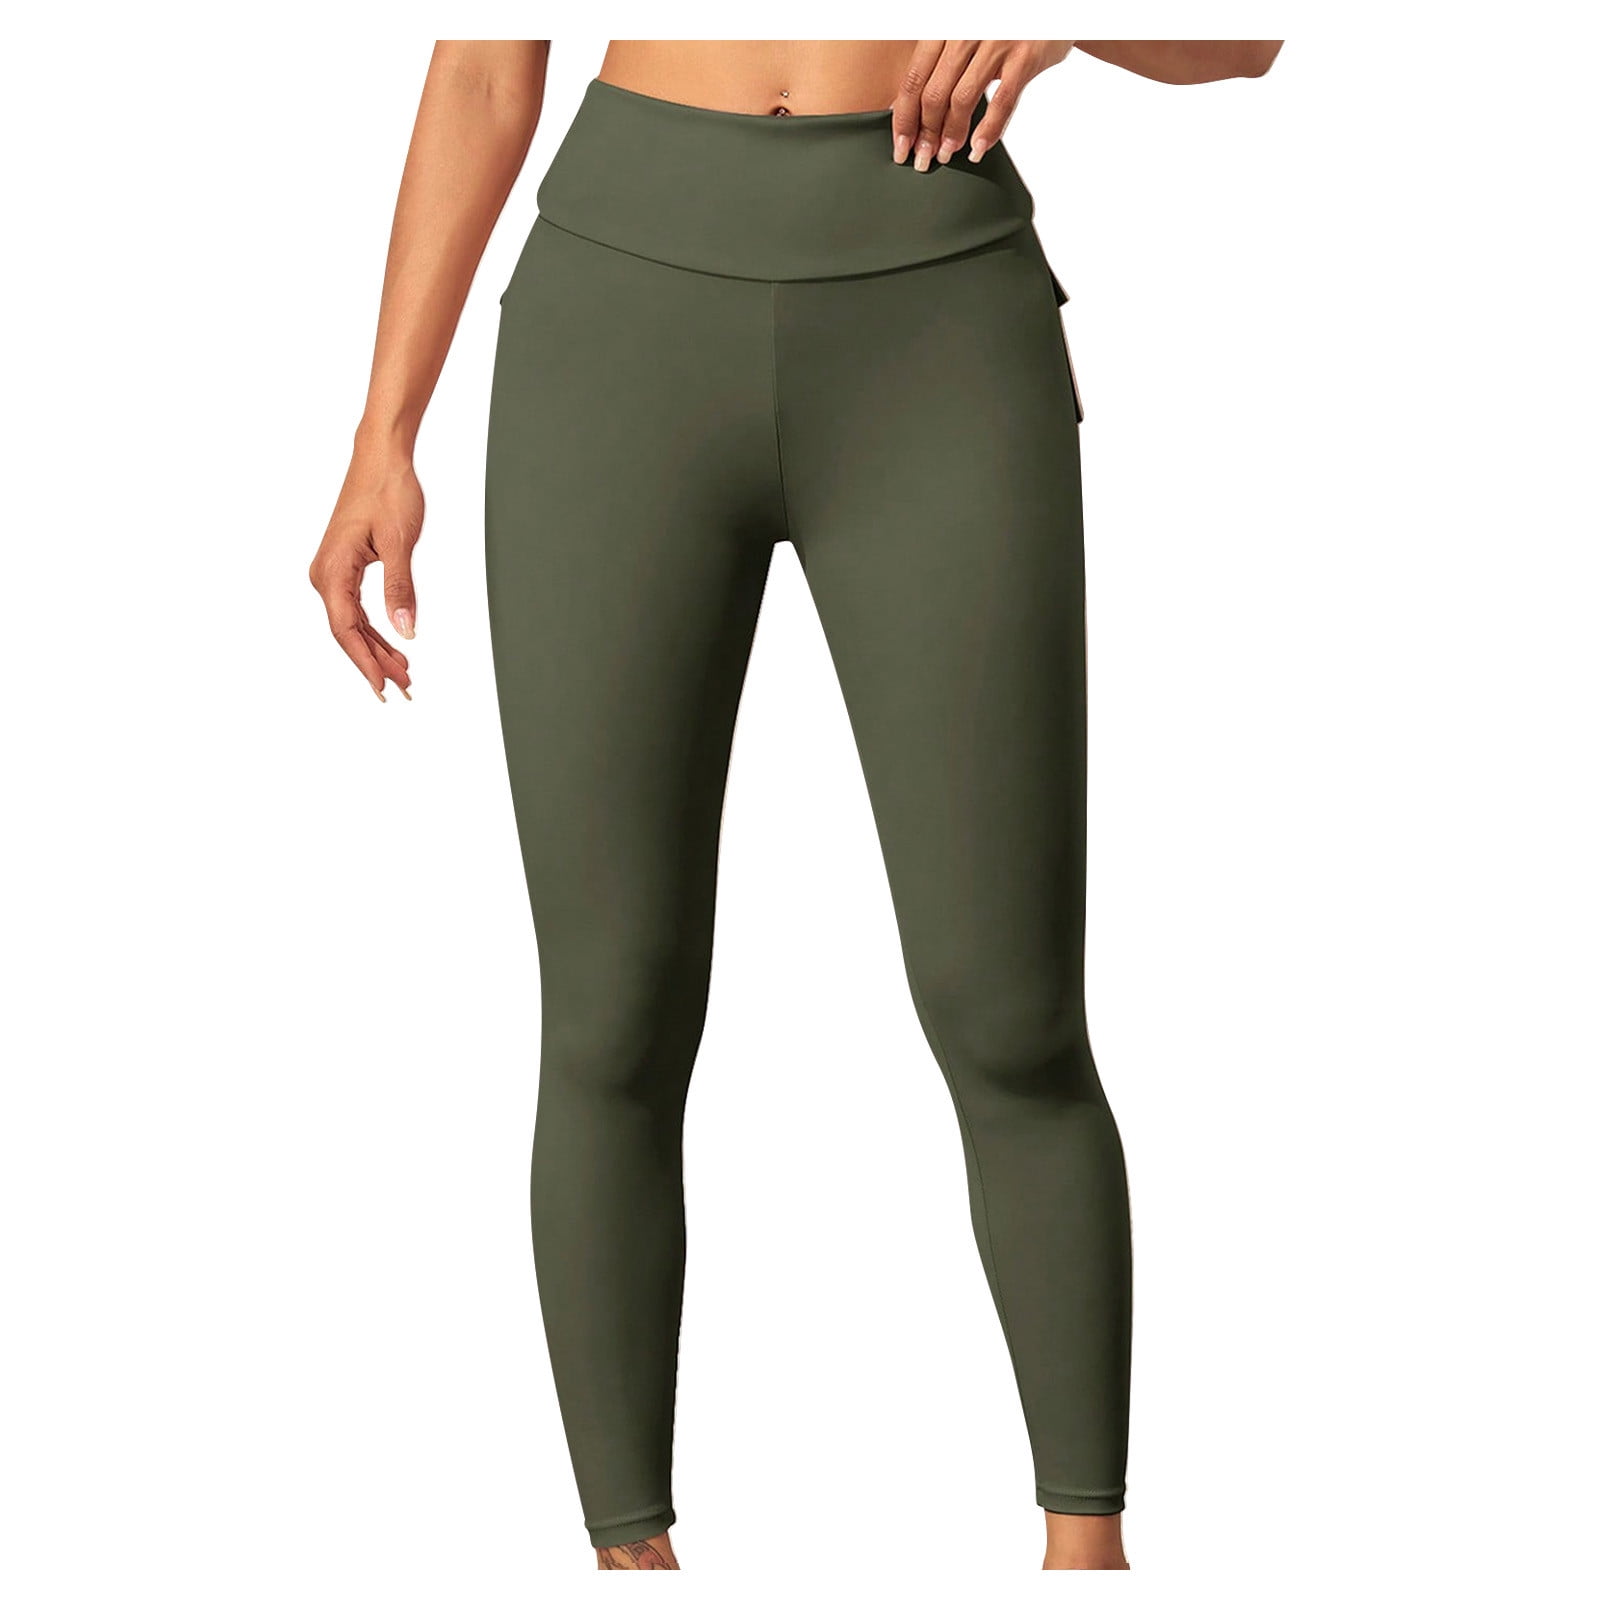 Yoga Leggings for Women Cargo Pants Elastic Drawstring Waist Stretch  Workout Legging Trousers with Multi Pockets